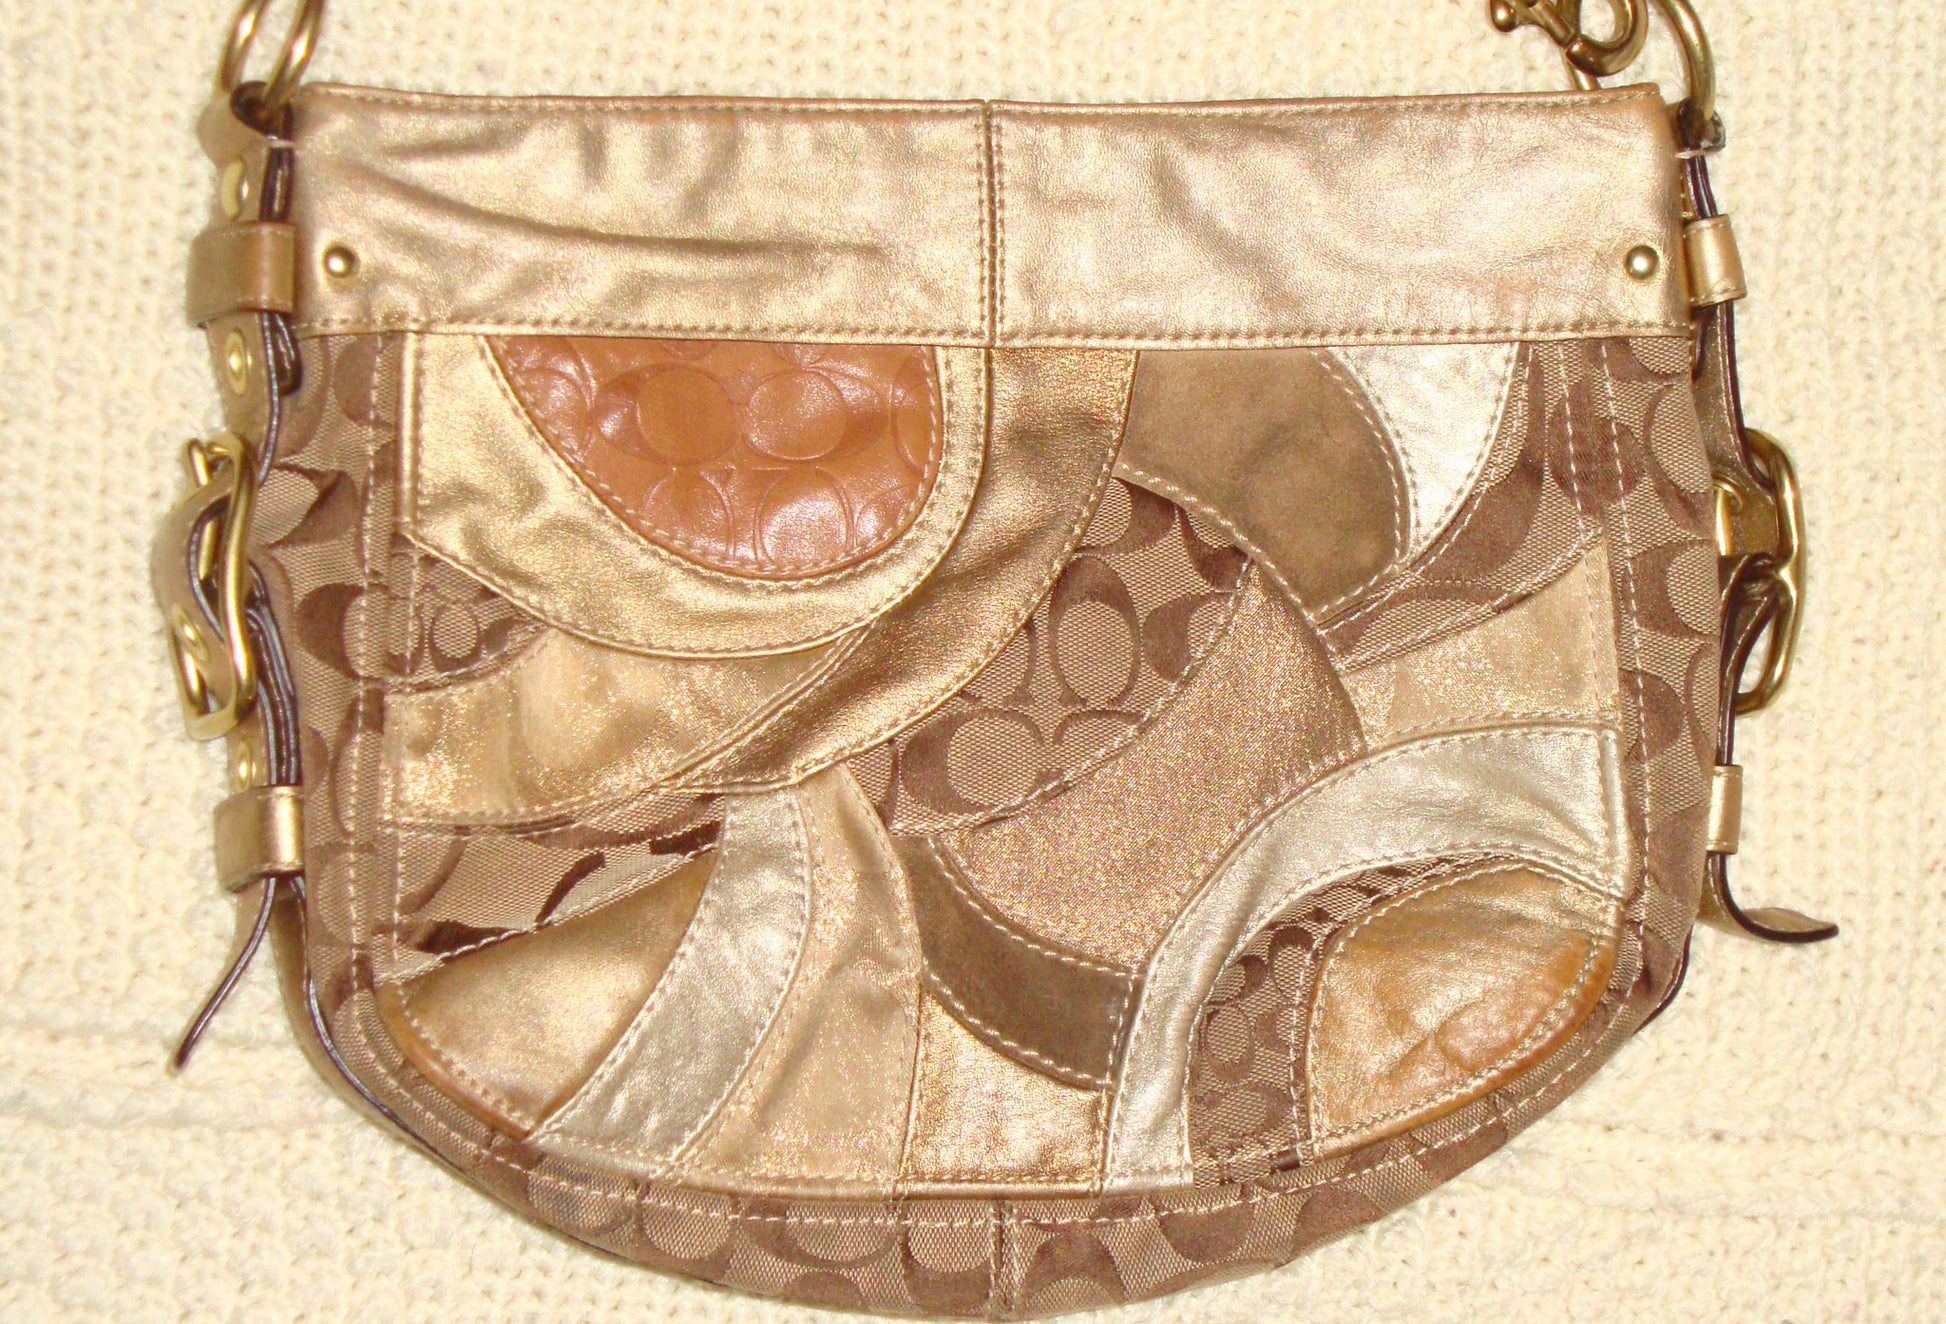 COACH GOLD LEATHER SUEDE PATCHWORK BAG PURSE Abby Essie